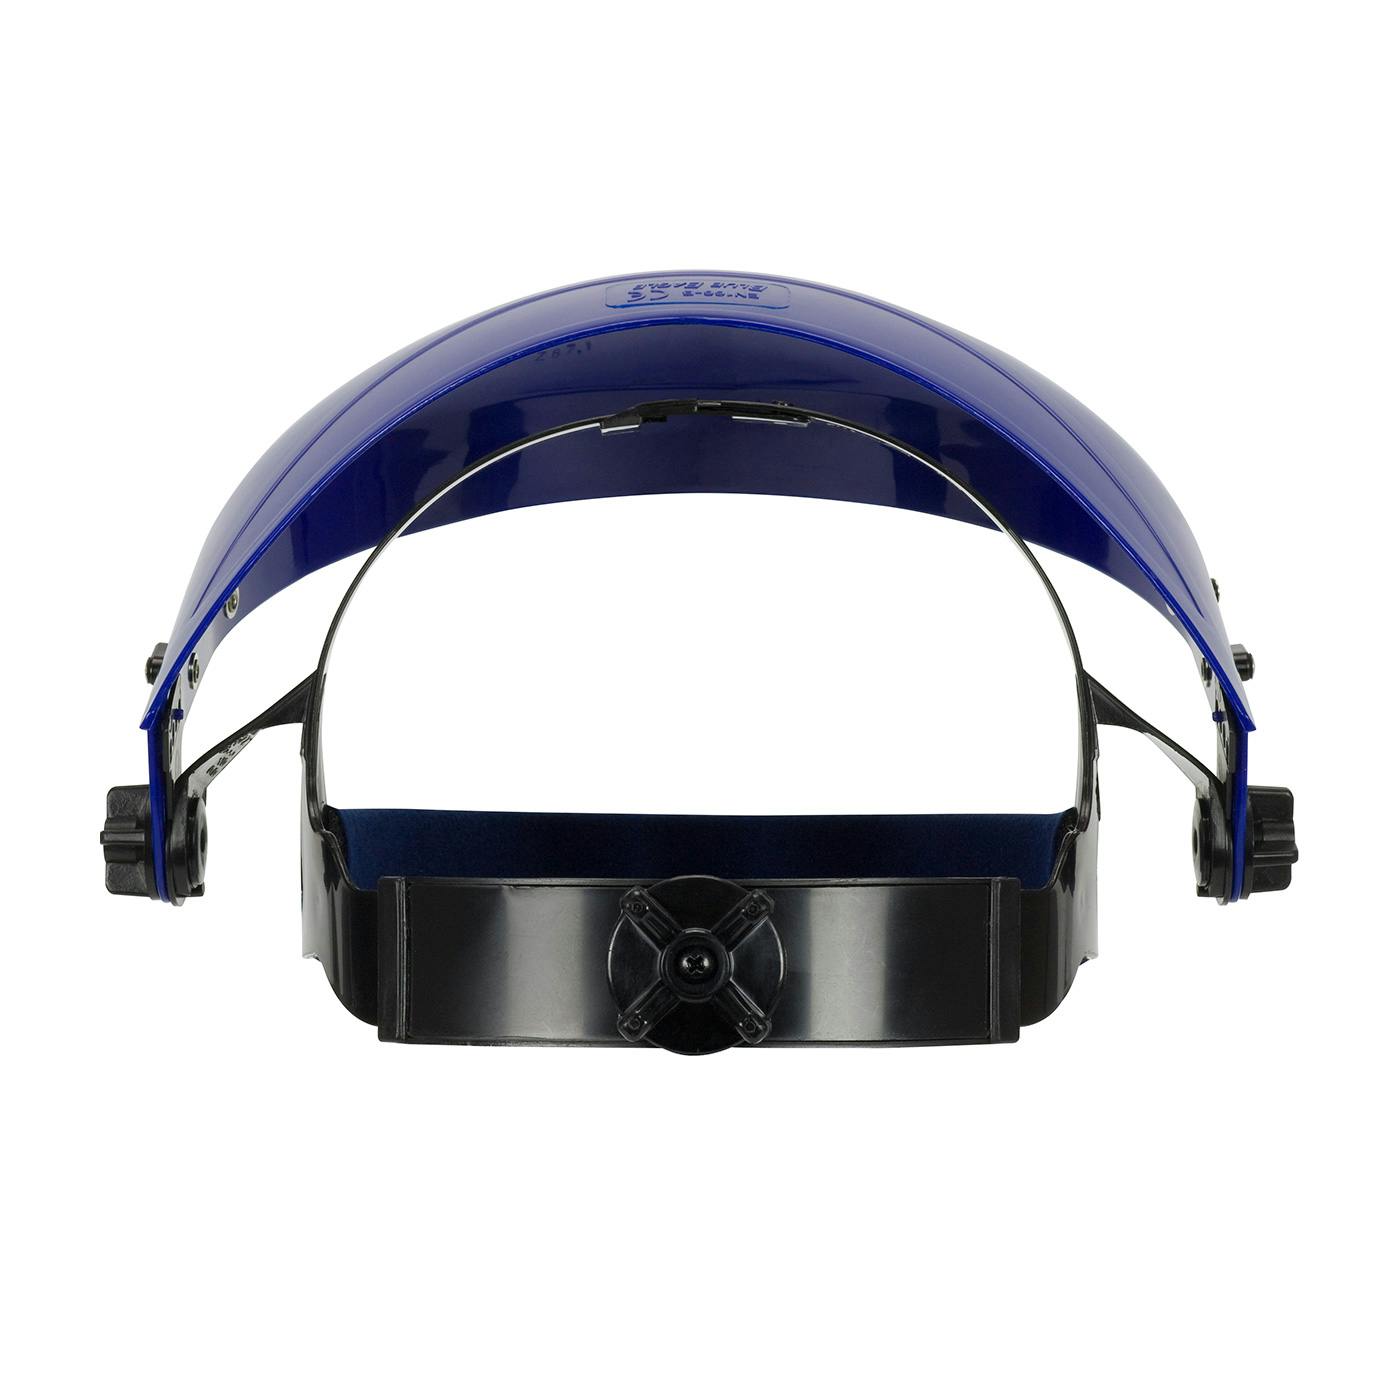 Headgear for Face Protection with Ratchet Suspension - Economy, Blue (251-01-5400) - OS_0